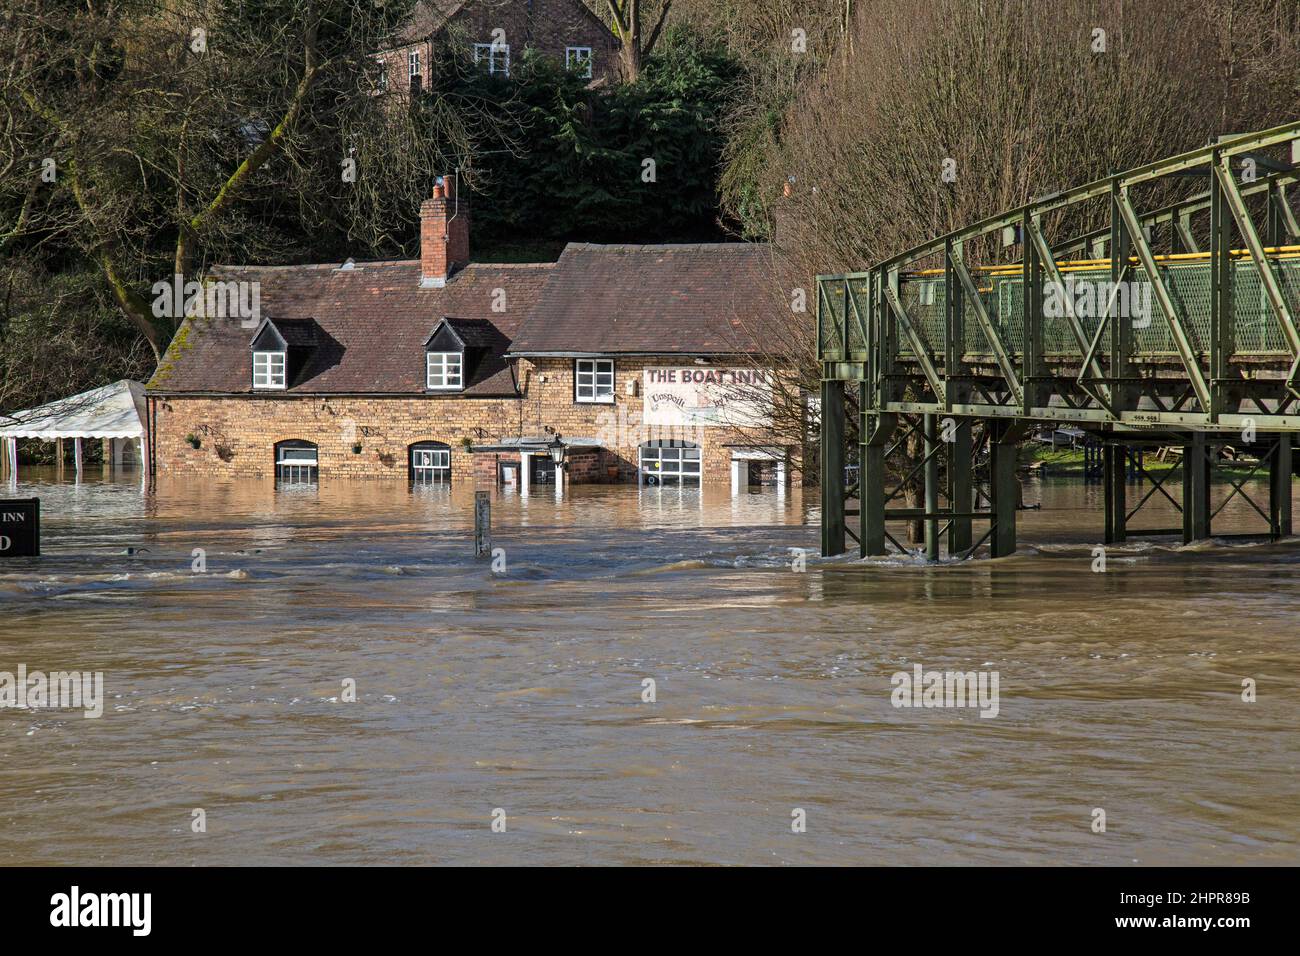 Shropshire, England. 23/02/2022, The Boat Inn, in the village of Jackfield in the Ironbridge Gorge in Shropshire, flooded, after the River Severn burst its banks after a week of storms and heavy rain. Stock Photo